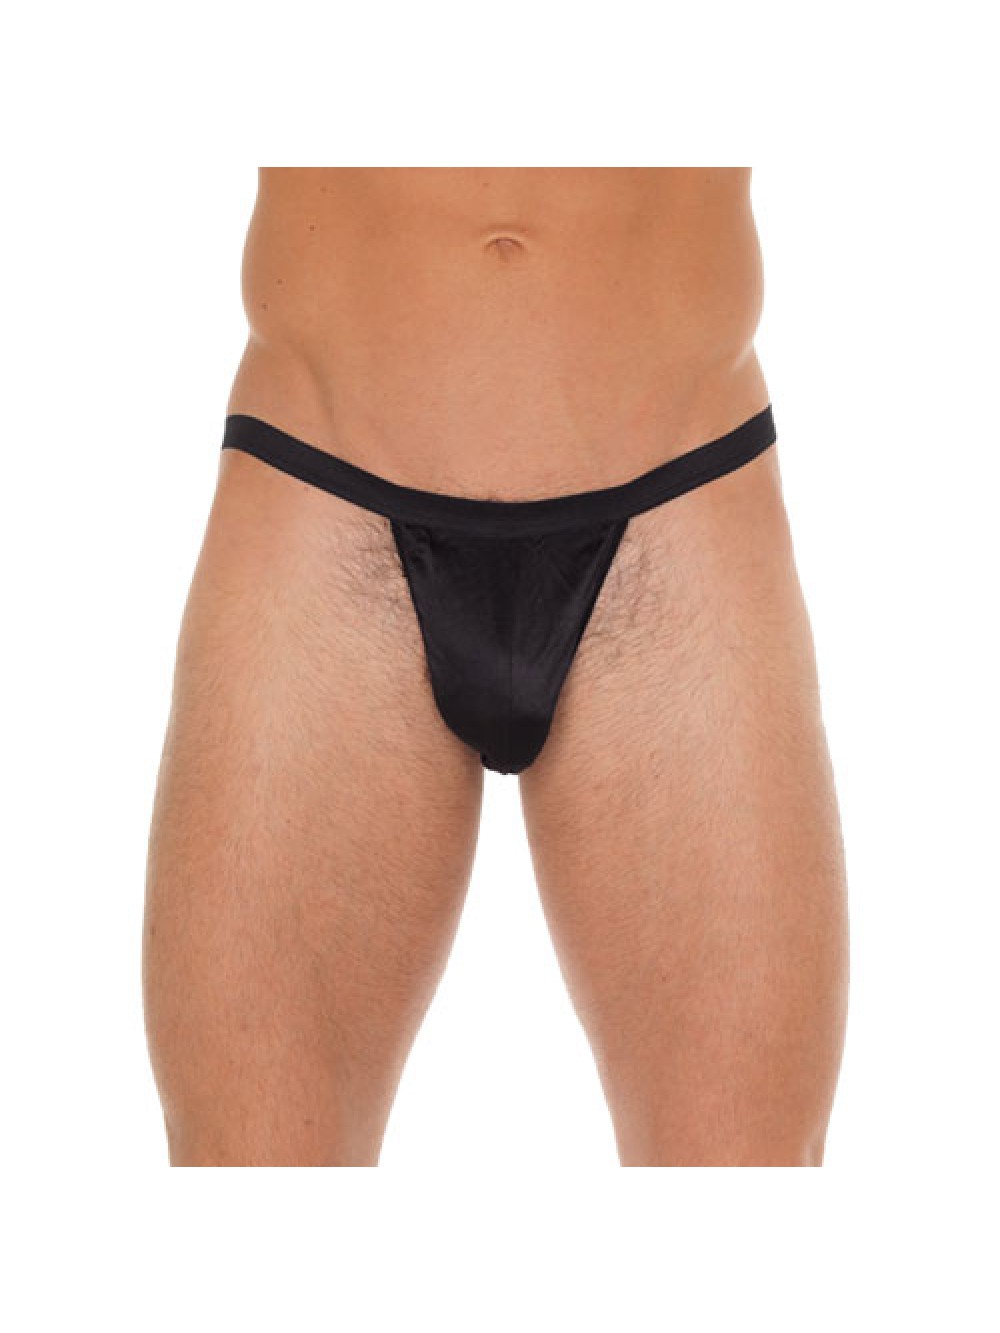 Mens Black G-String With Black Pouch